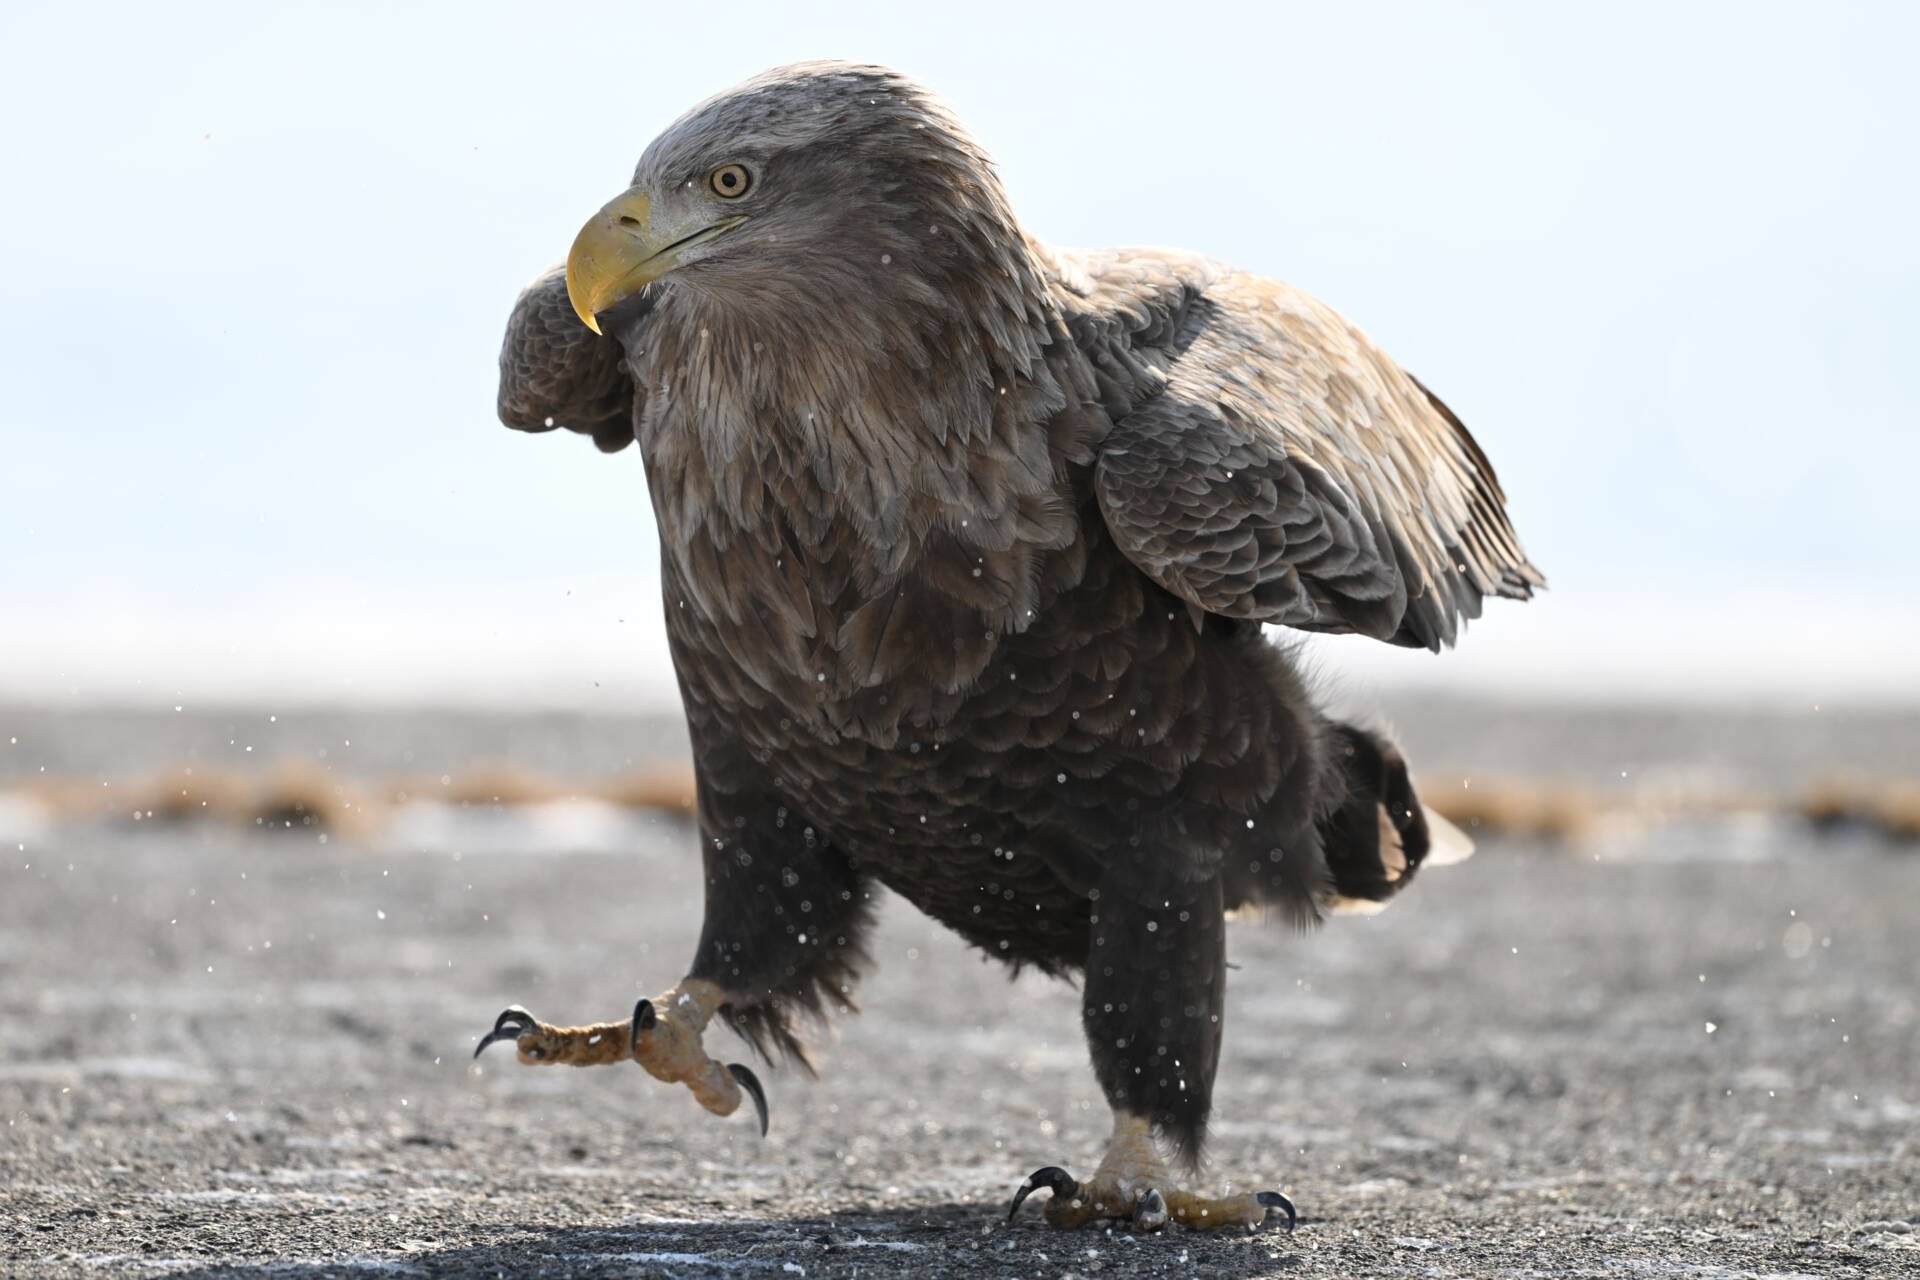 Sample photo of a big old bird strutting about triumphantly